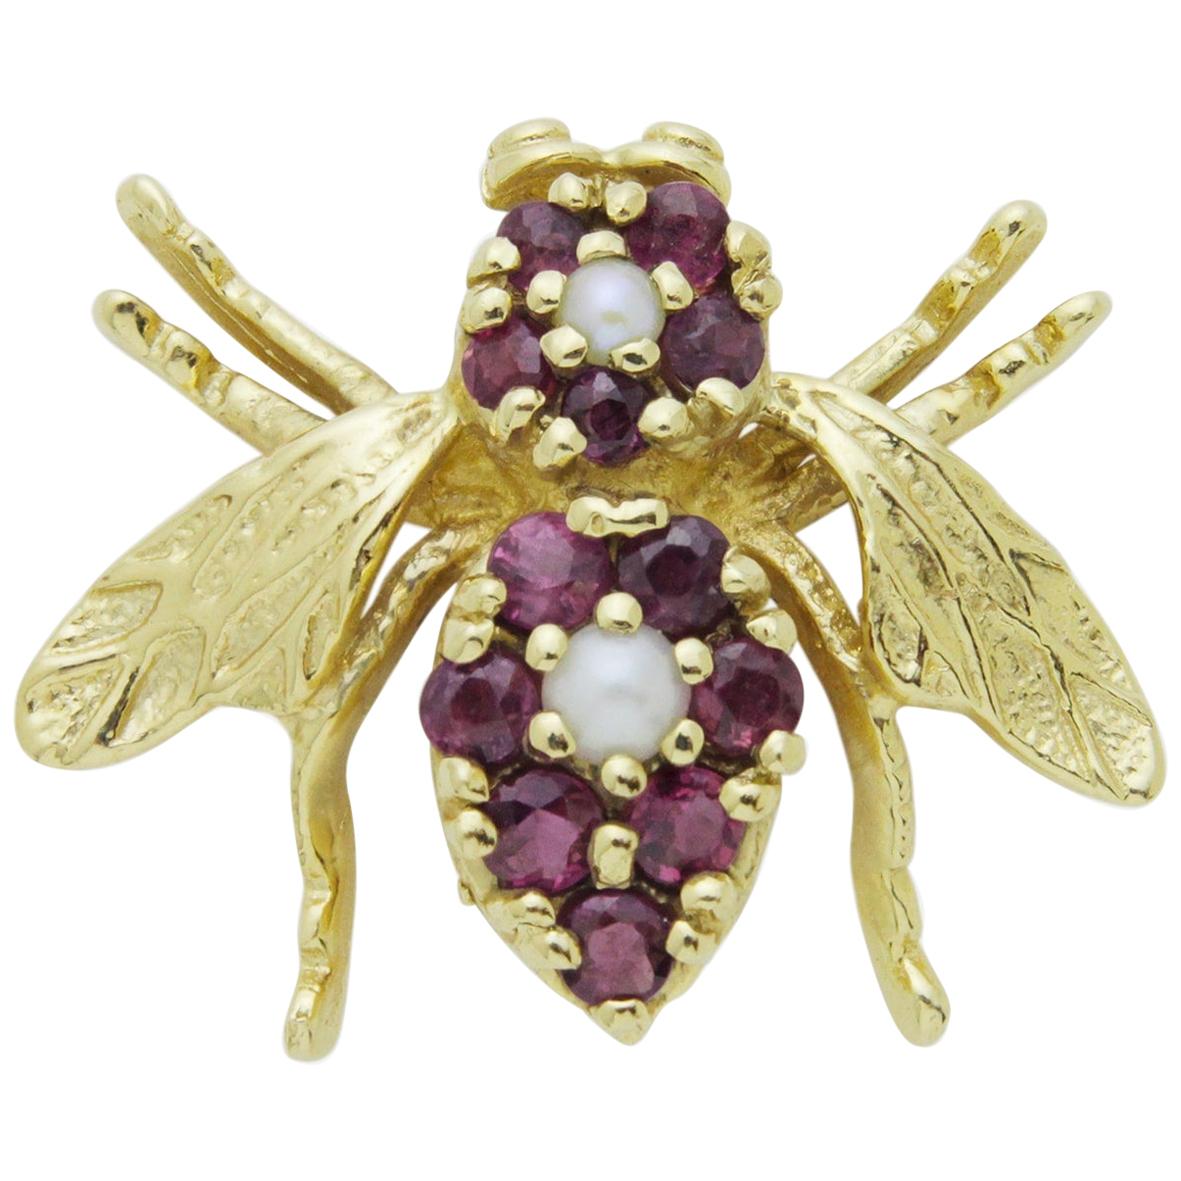 18 Karat Gold Bee Pin with Rubies and Pearls